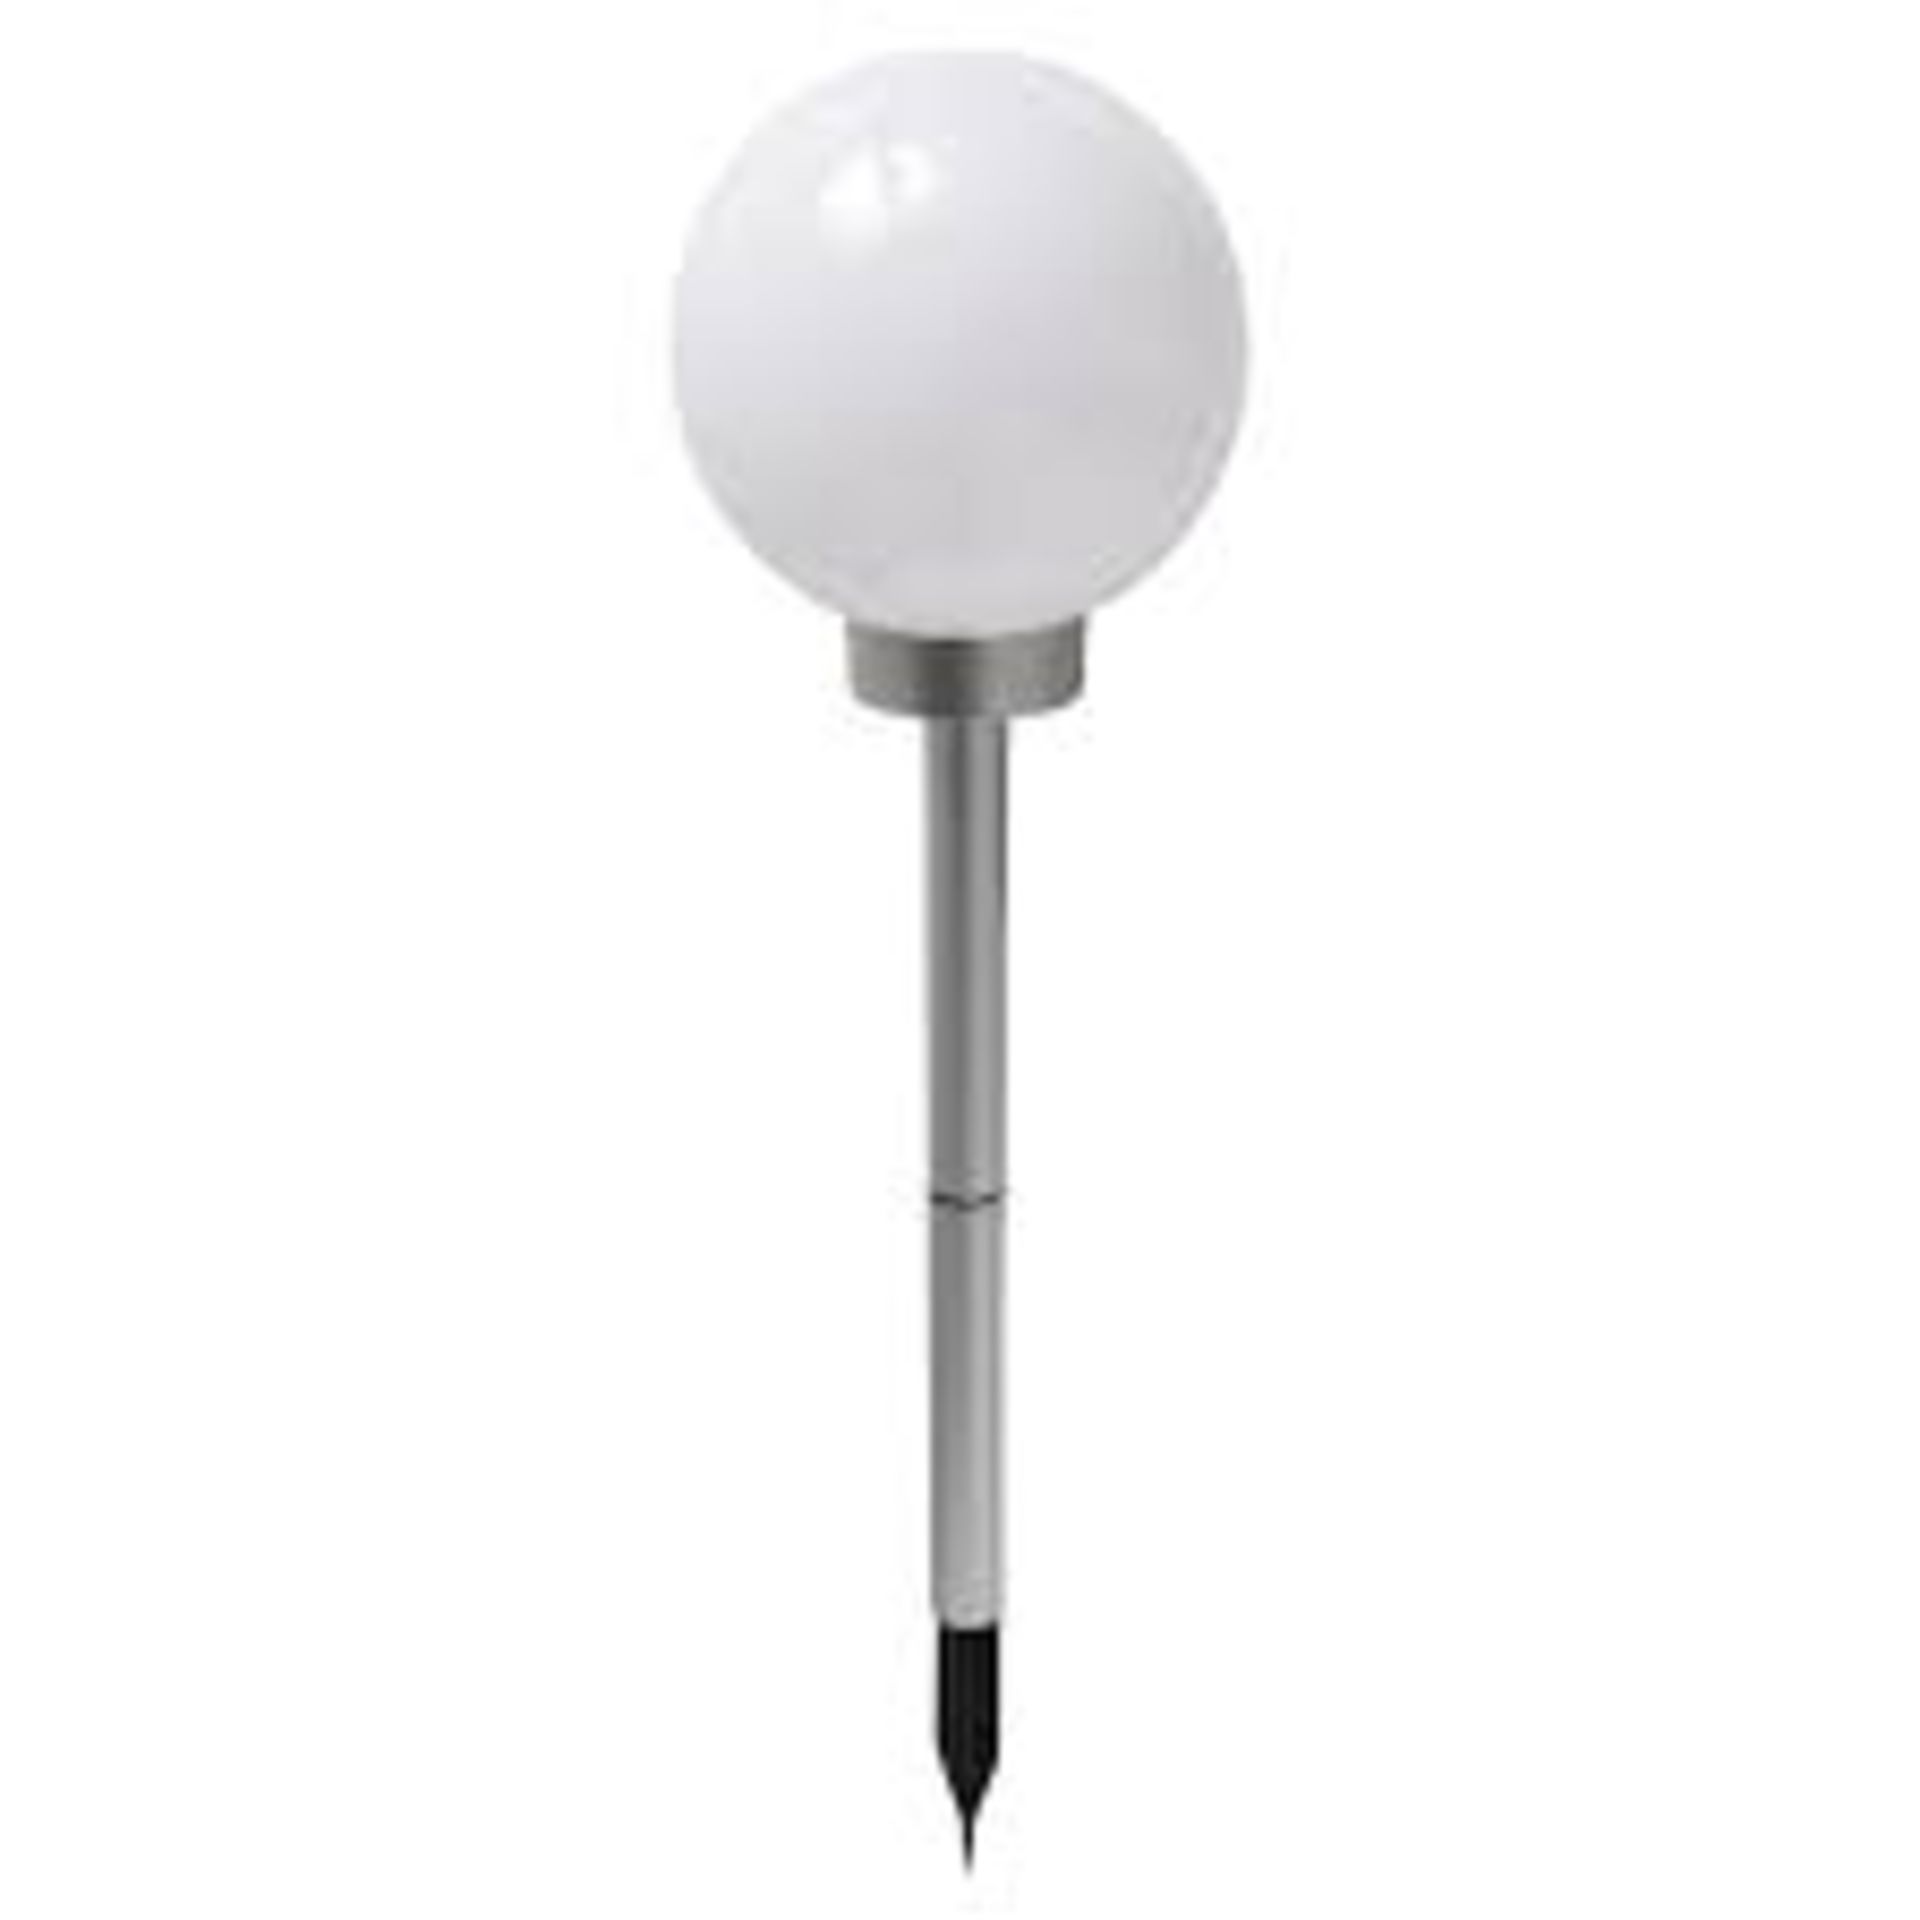 + VAT Brand New Solar Stake Light - LED Intergrated - Operates Up To 6 Hours